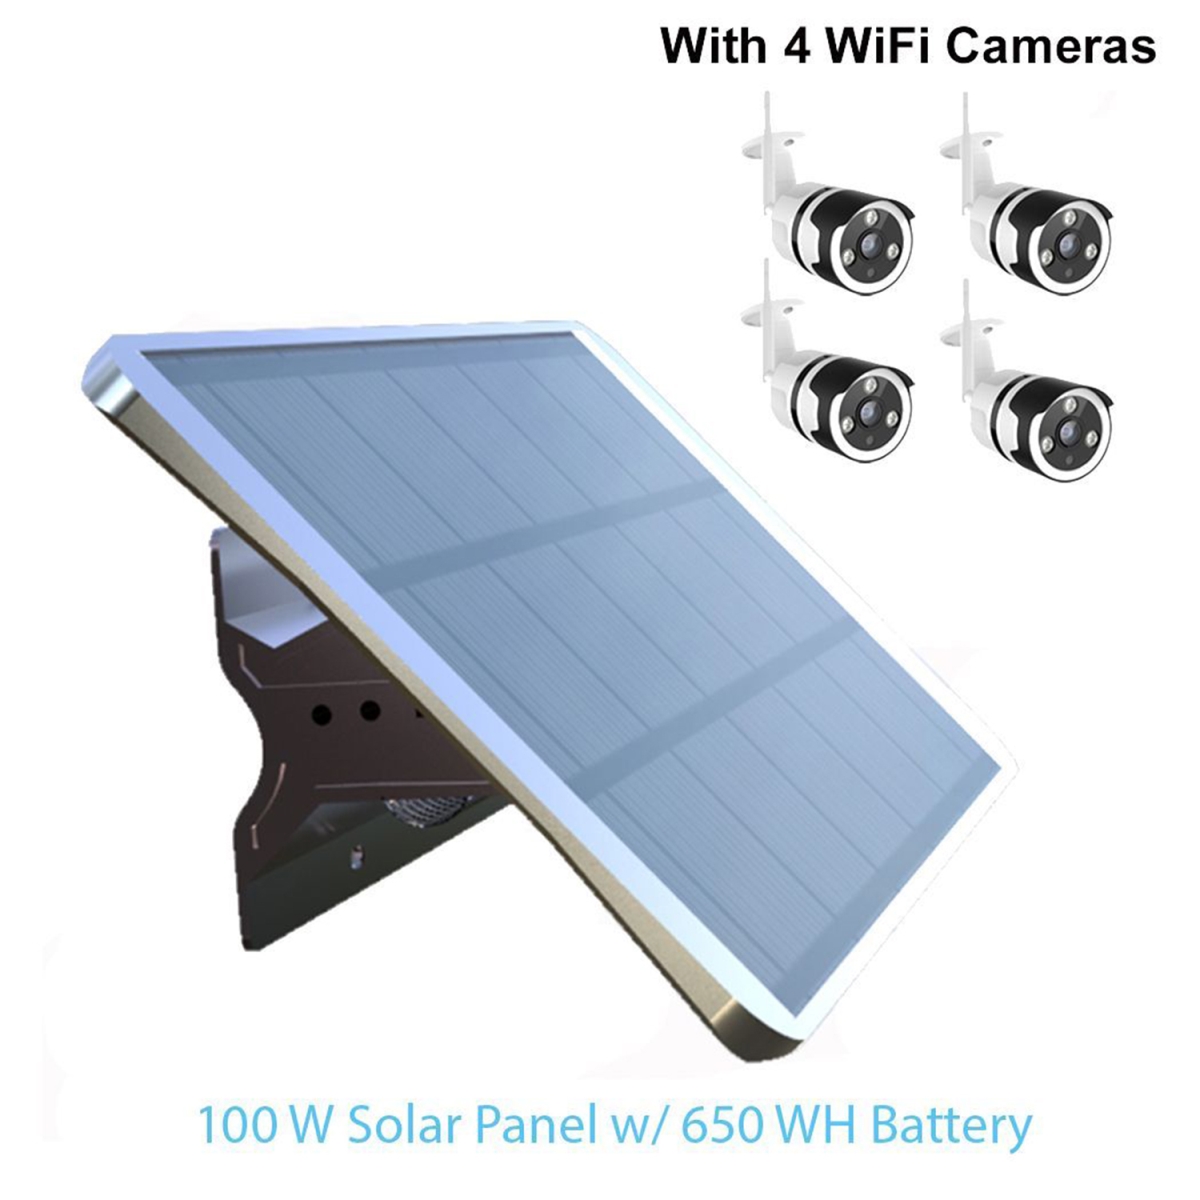 Picture of eLEDing EE8100W-POE650-4CAM 100W 650WH Battery Plus 4 Cameras High Voltage Solar Panel with Optimum Wi-Fi Camera System